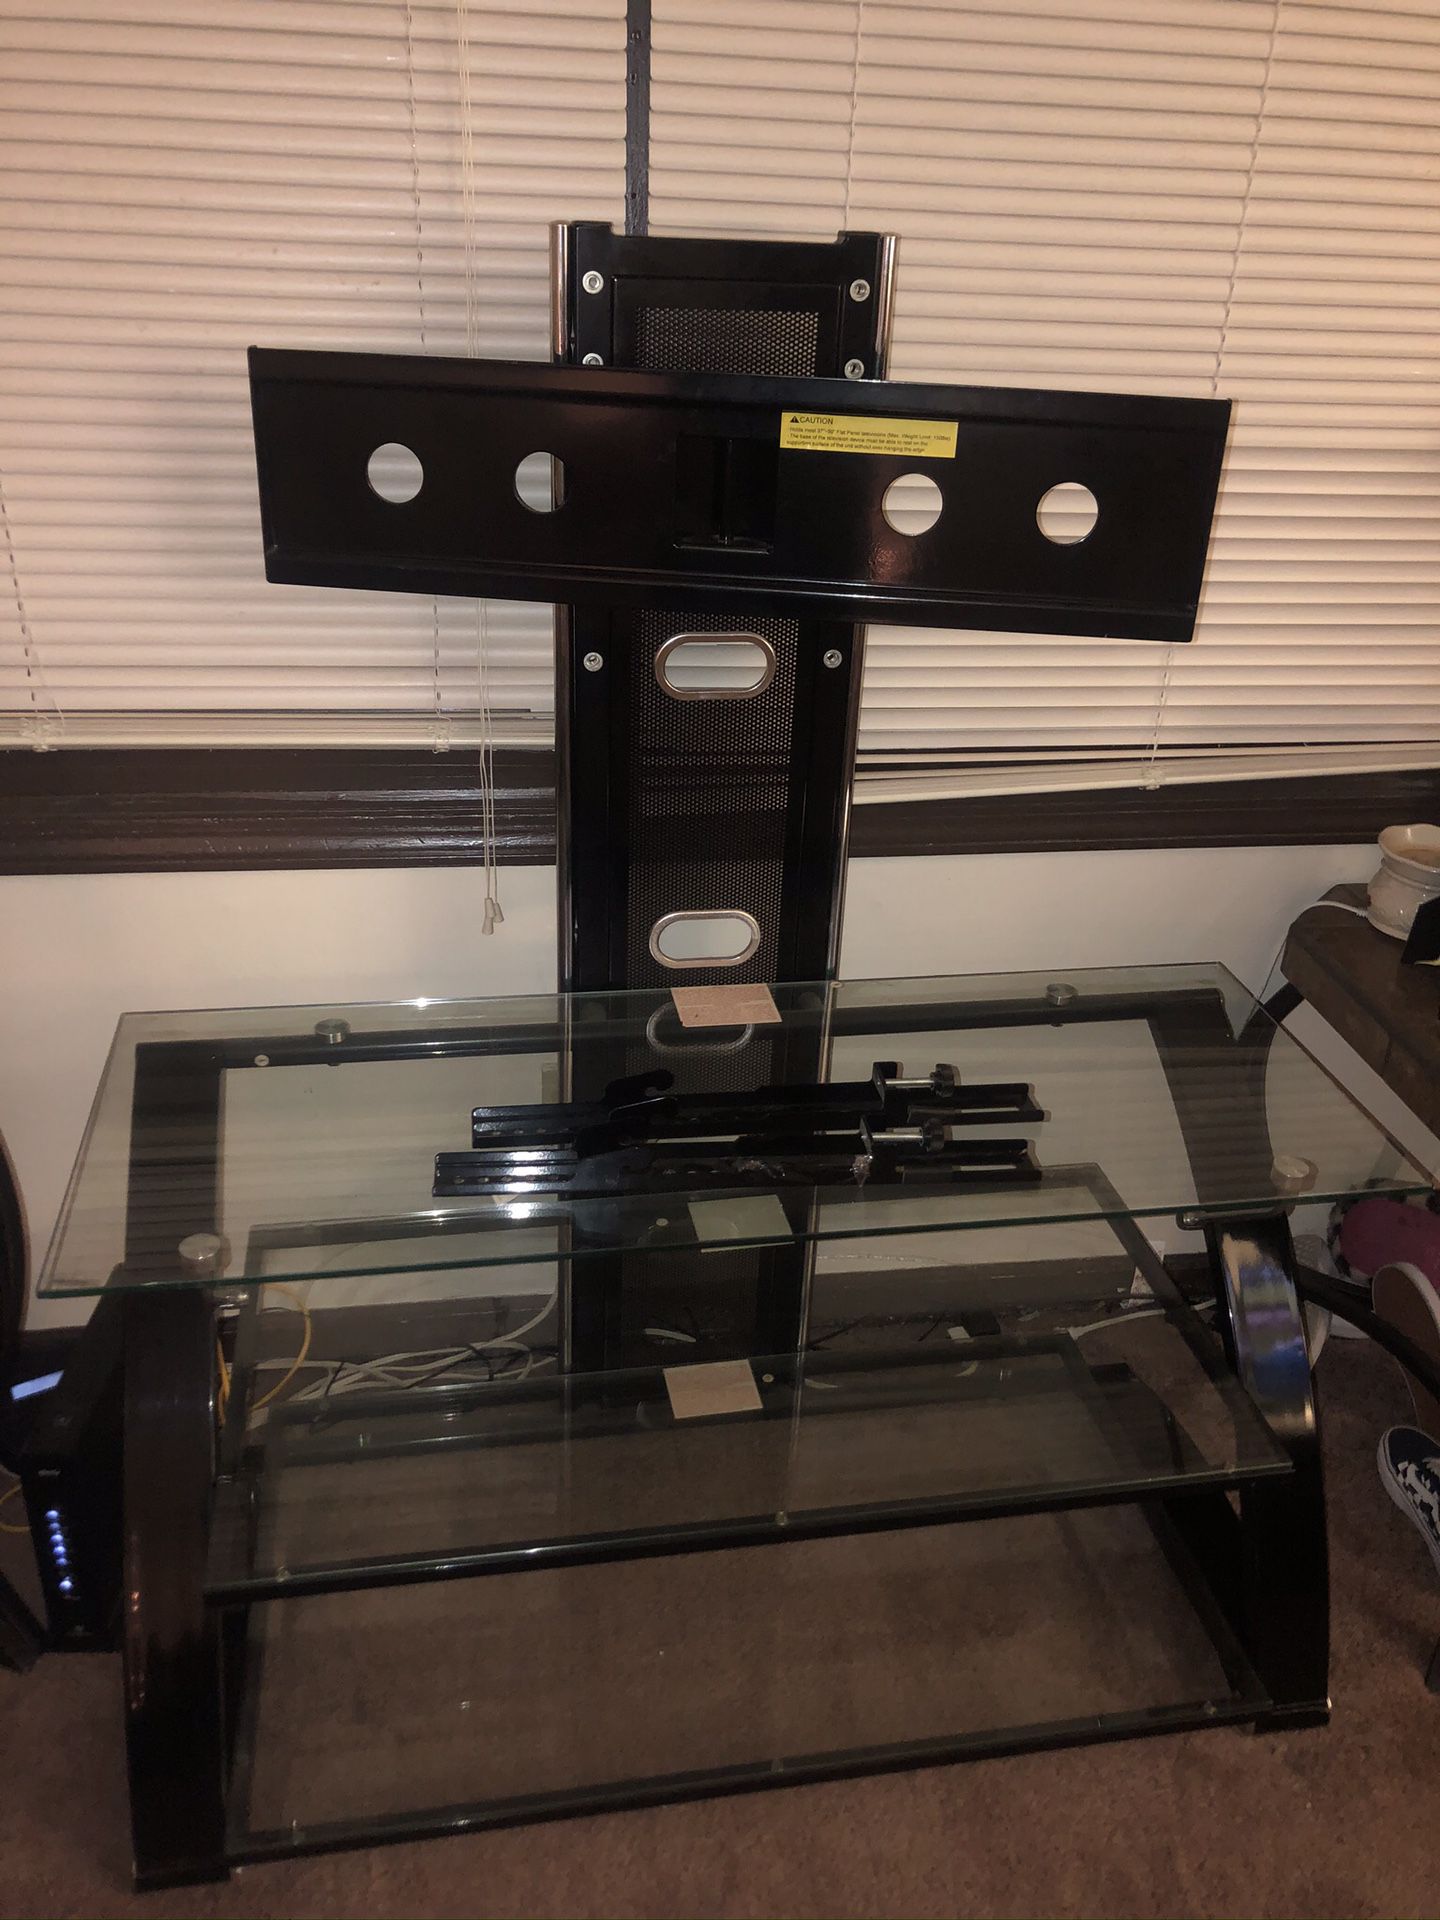 Swiveling TV stand